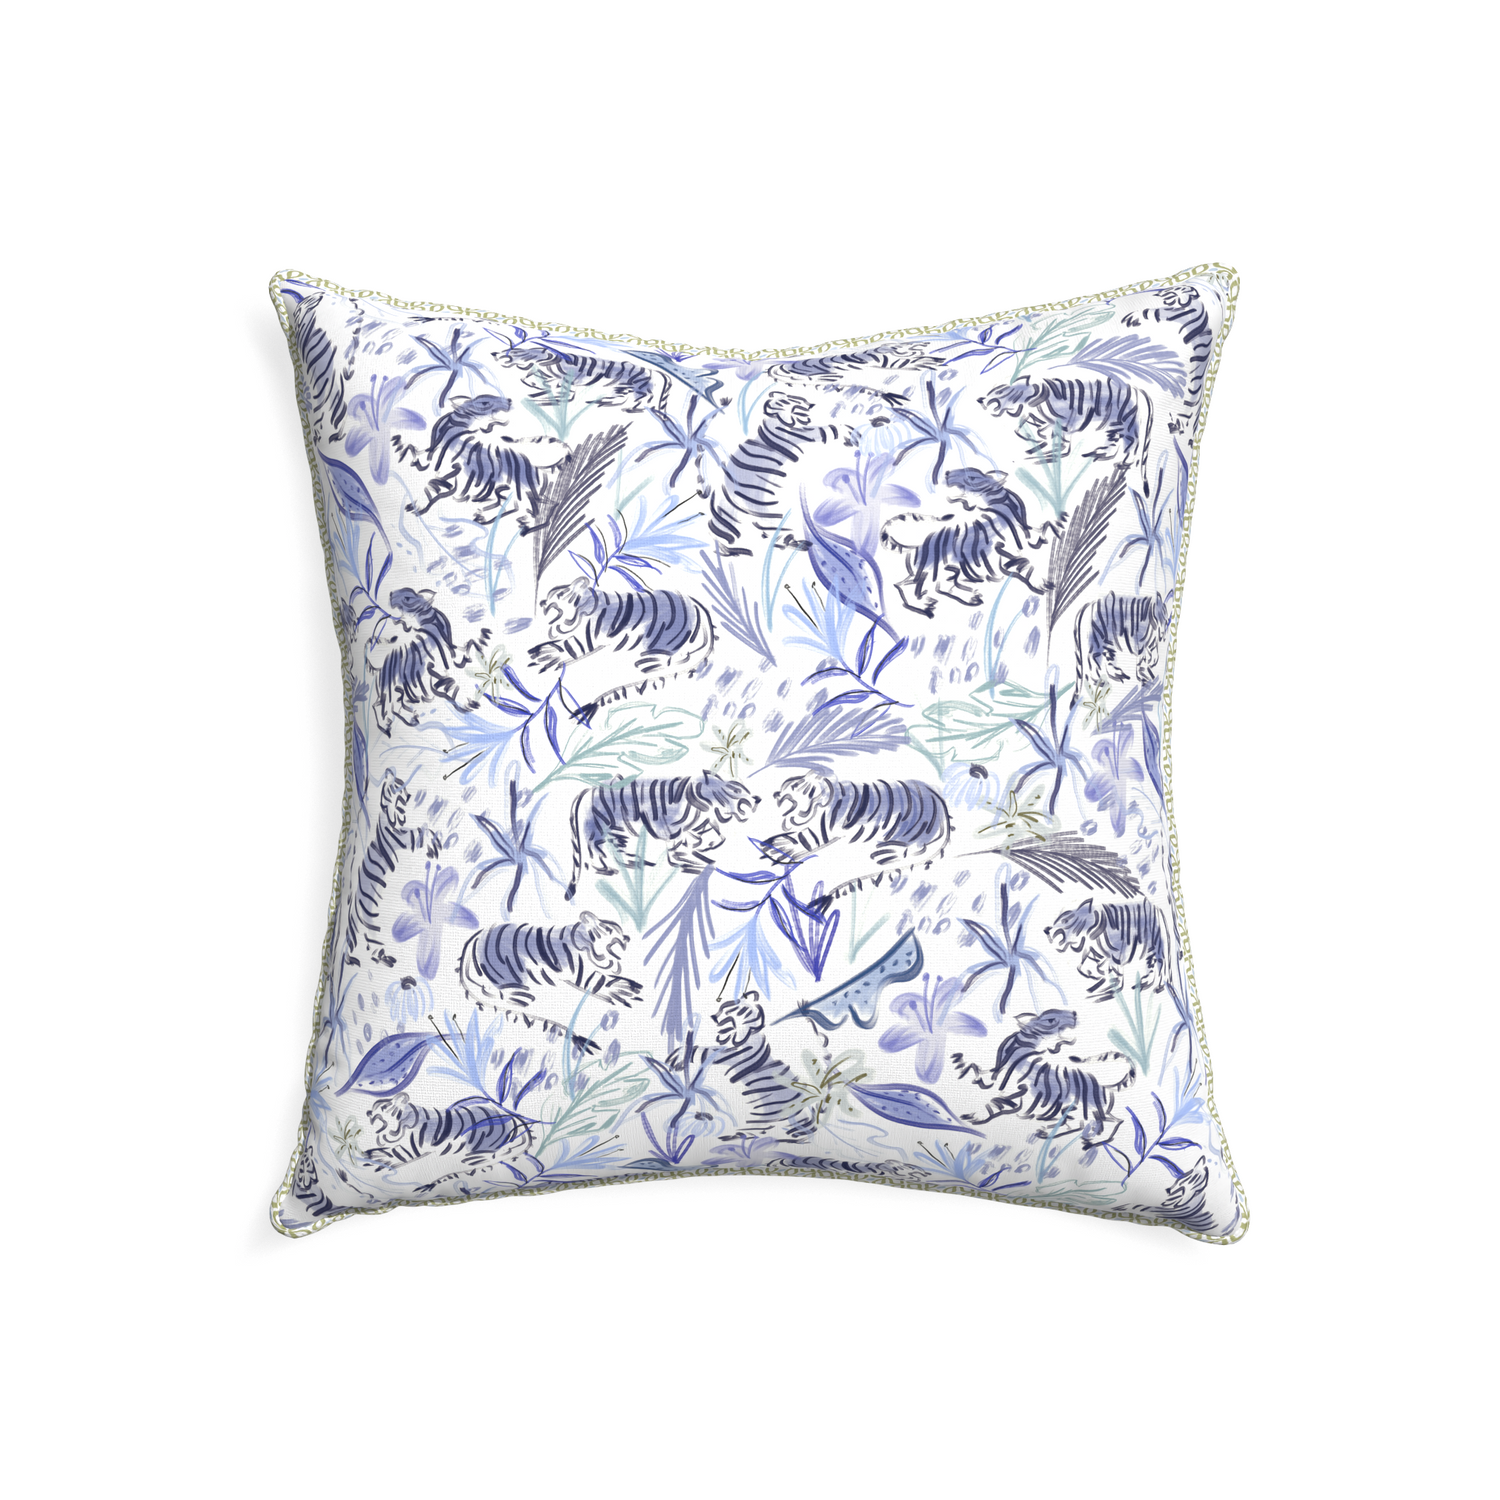 22-square frida blue custom blue with intricate tiger designpillow with l piping on white background